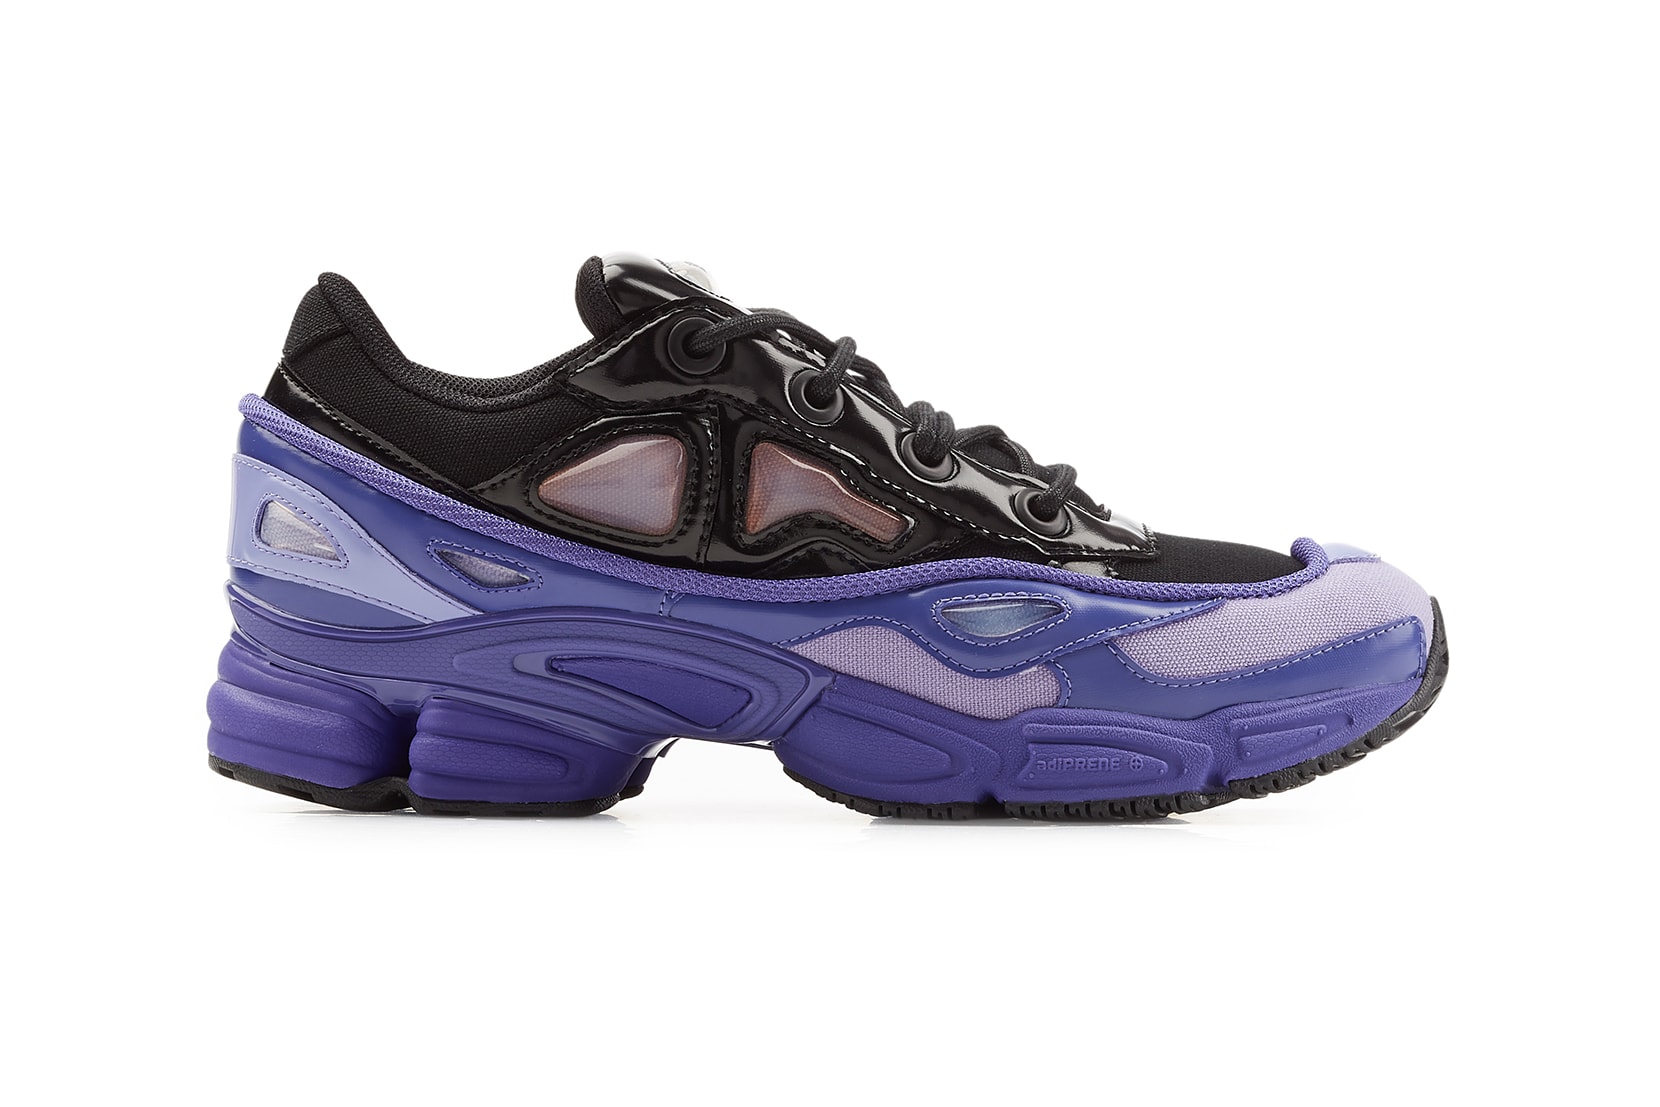 adidas by Raf Simons Ozweego III White Colorway Purple Colorway Red Colorway